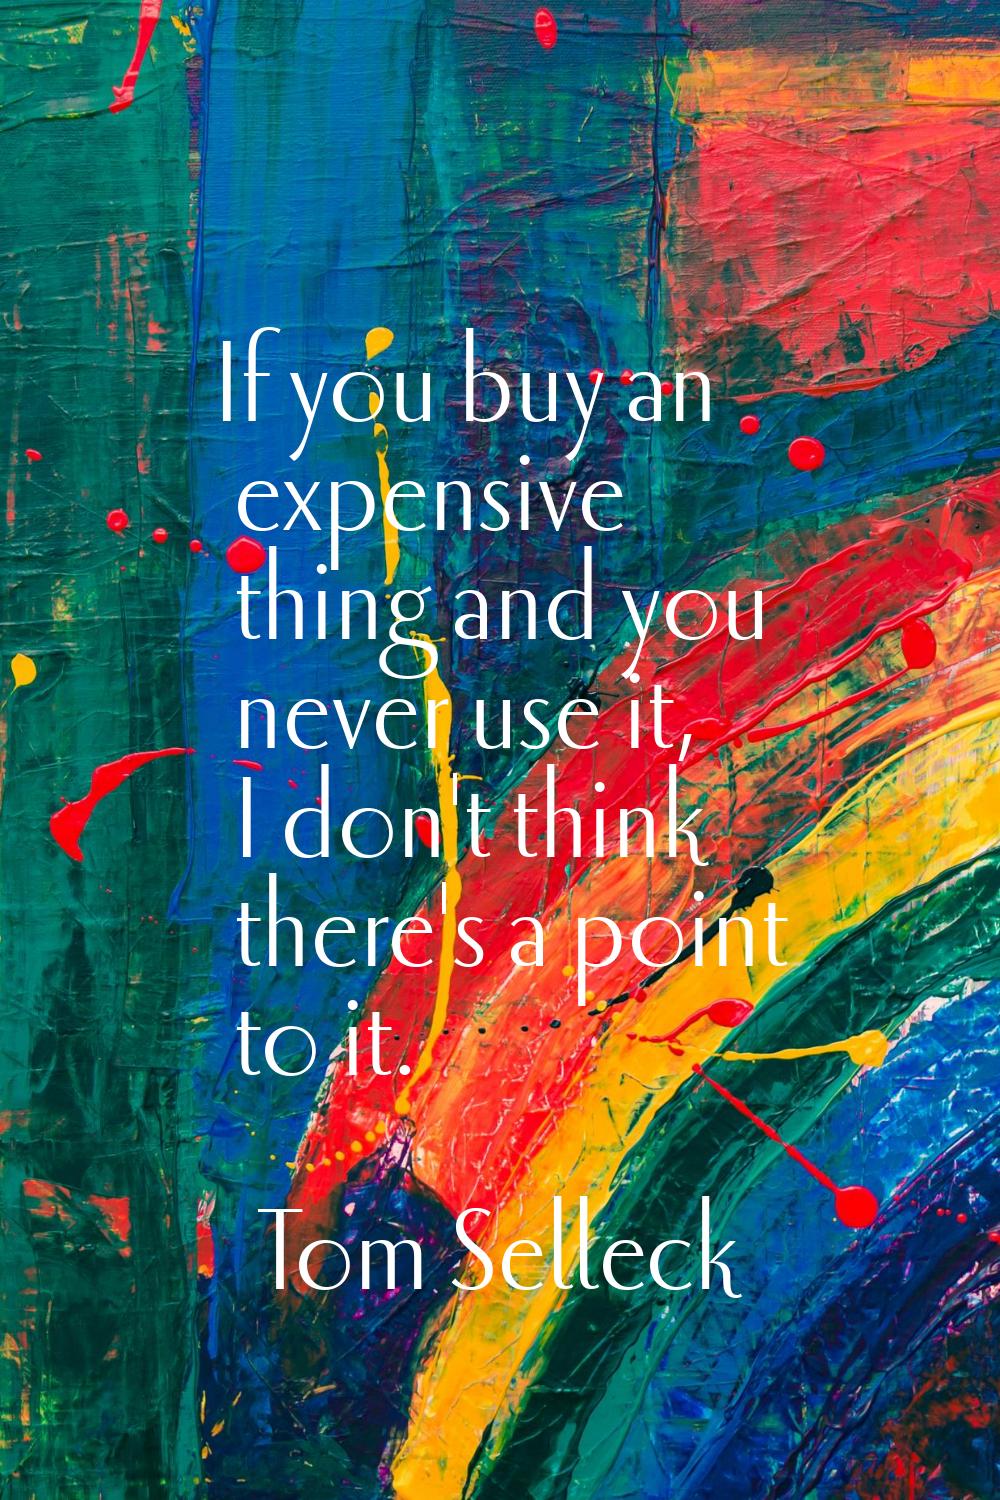 If you buy an expensive thing and you never use it, I don't think there's a point to it.